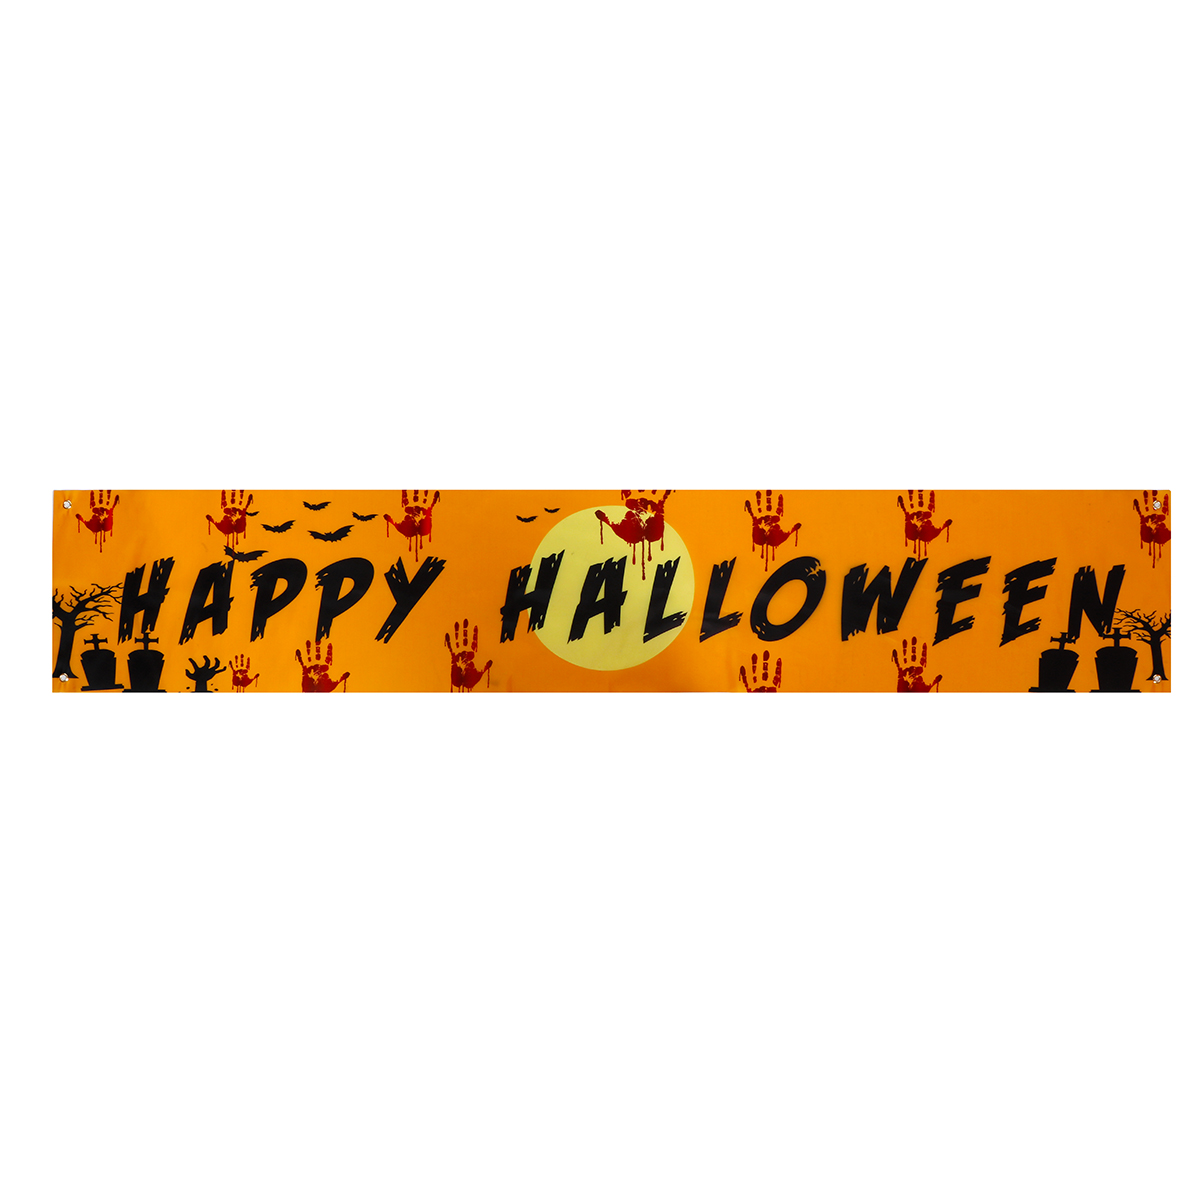 20036cm-Christmas-Banner-Decoration-Polyester-Cloth-Christmas-Halloween-Ornaments-for-Outside-Happy--1789566-2